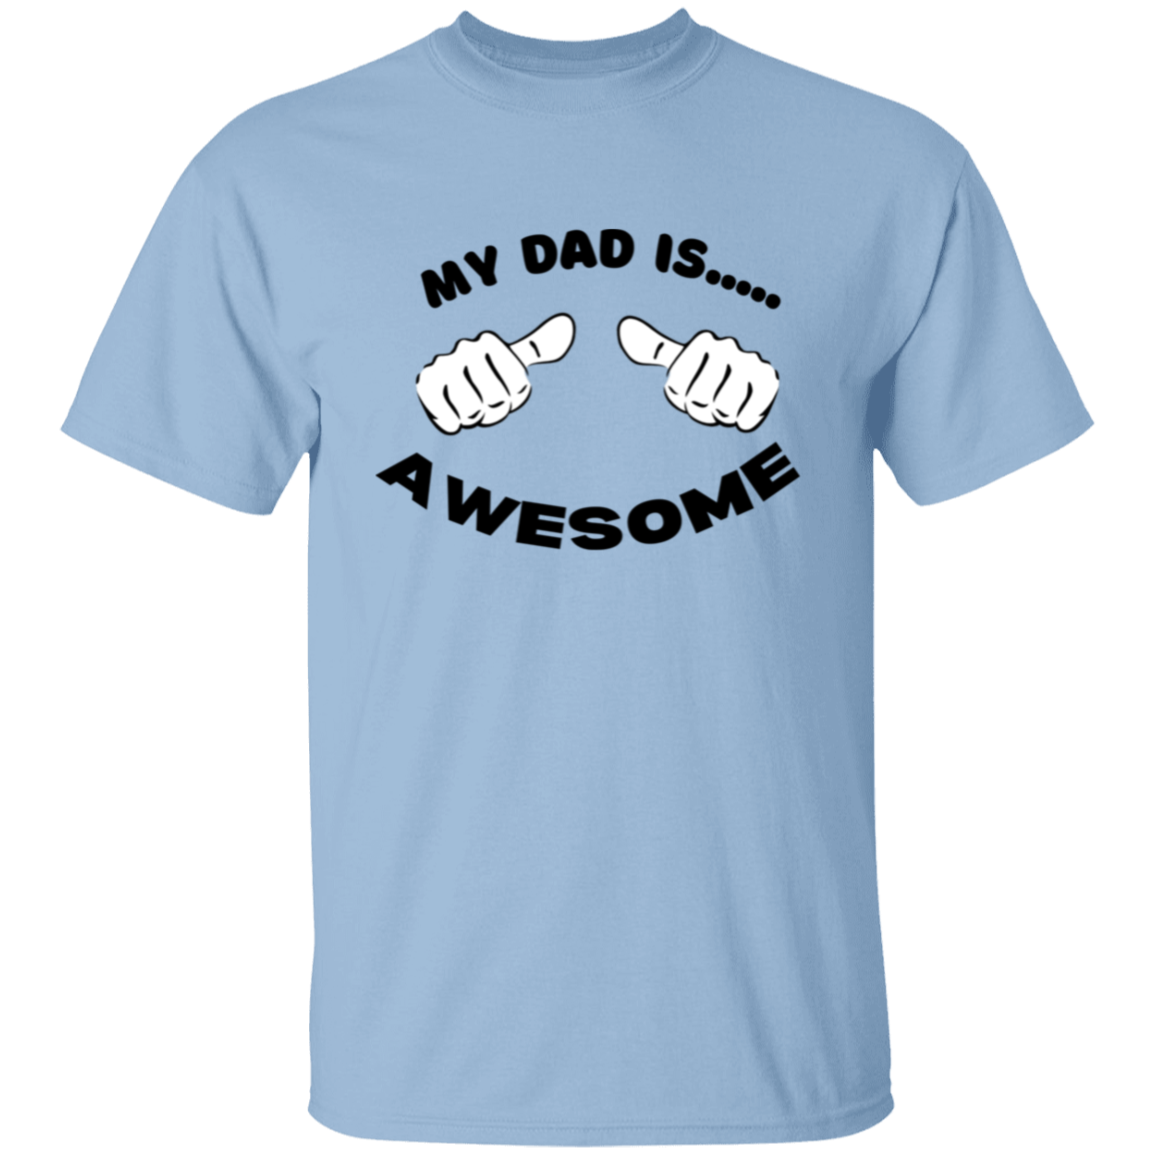 My Dad is Awesome T-Shirt